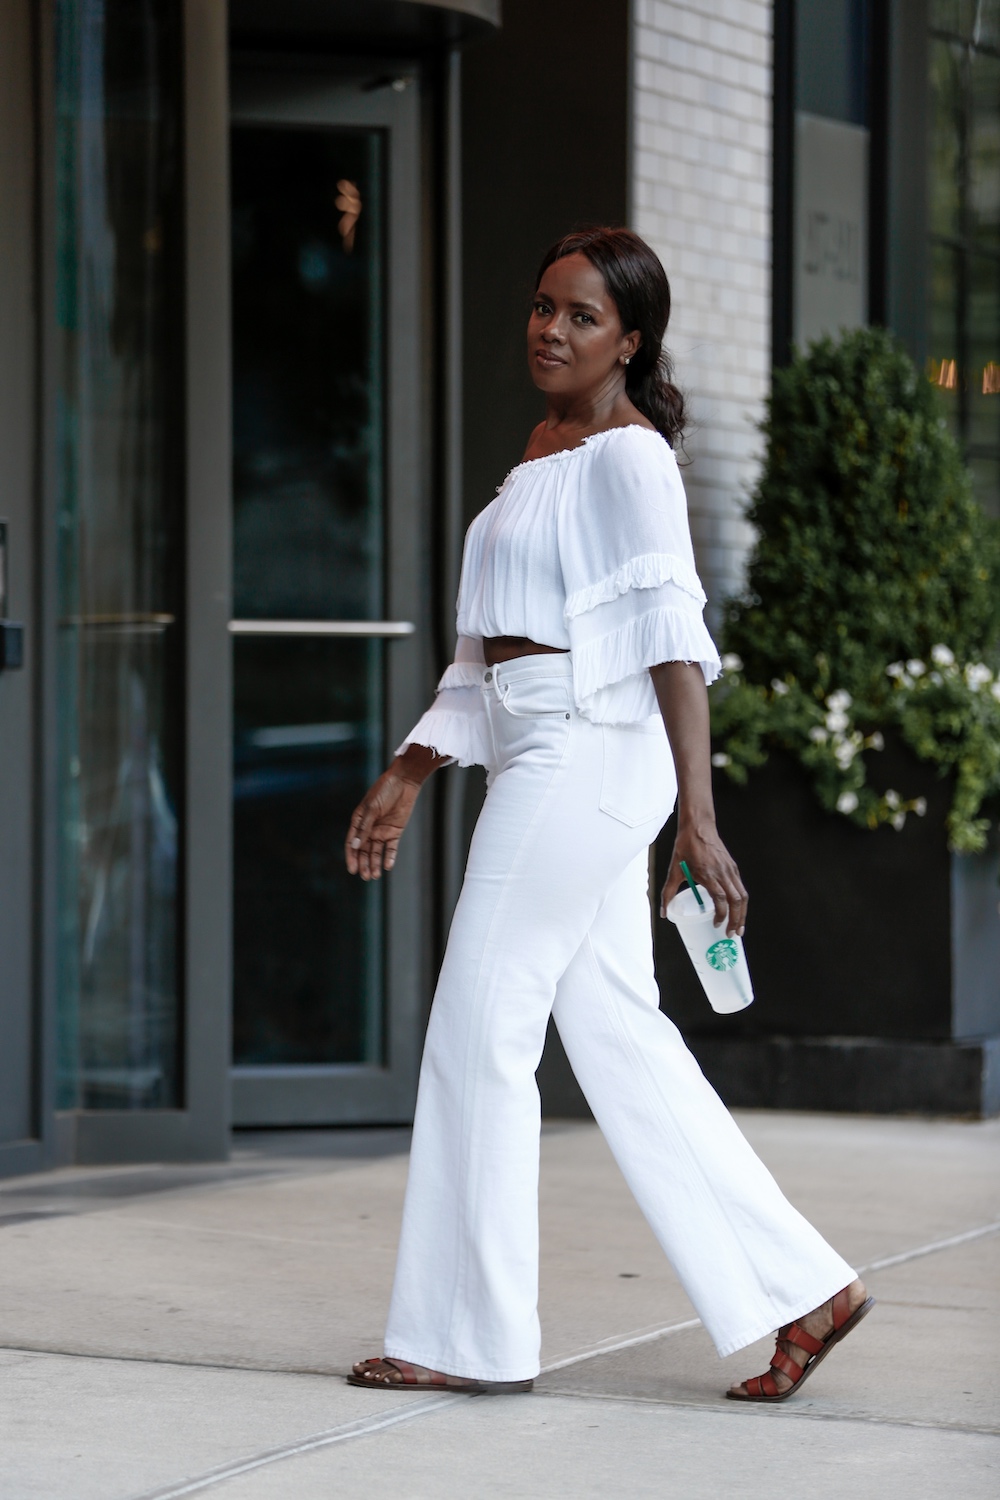 My Fave Looks: All White Outfits | Square Pearls